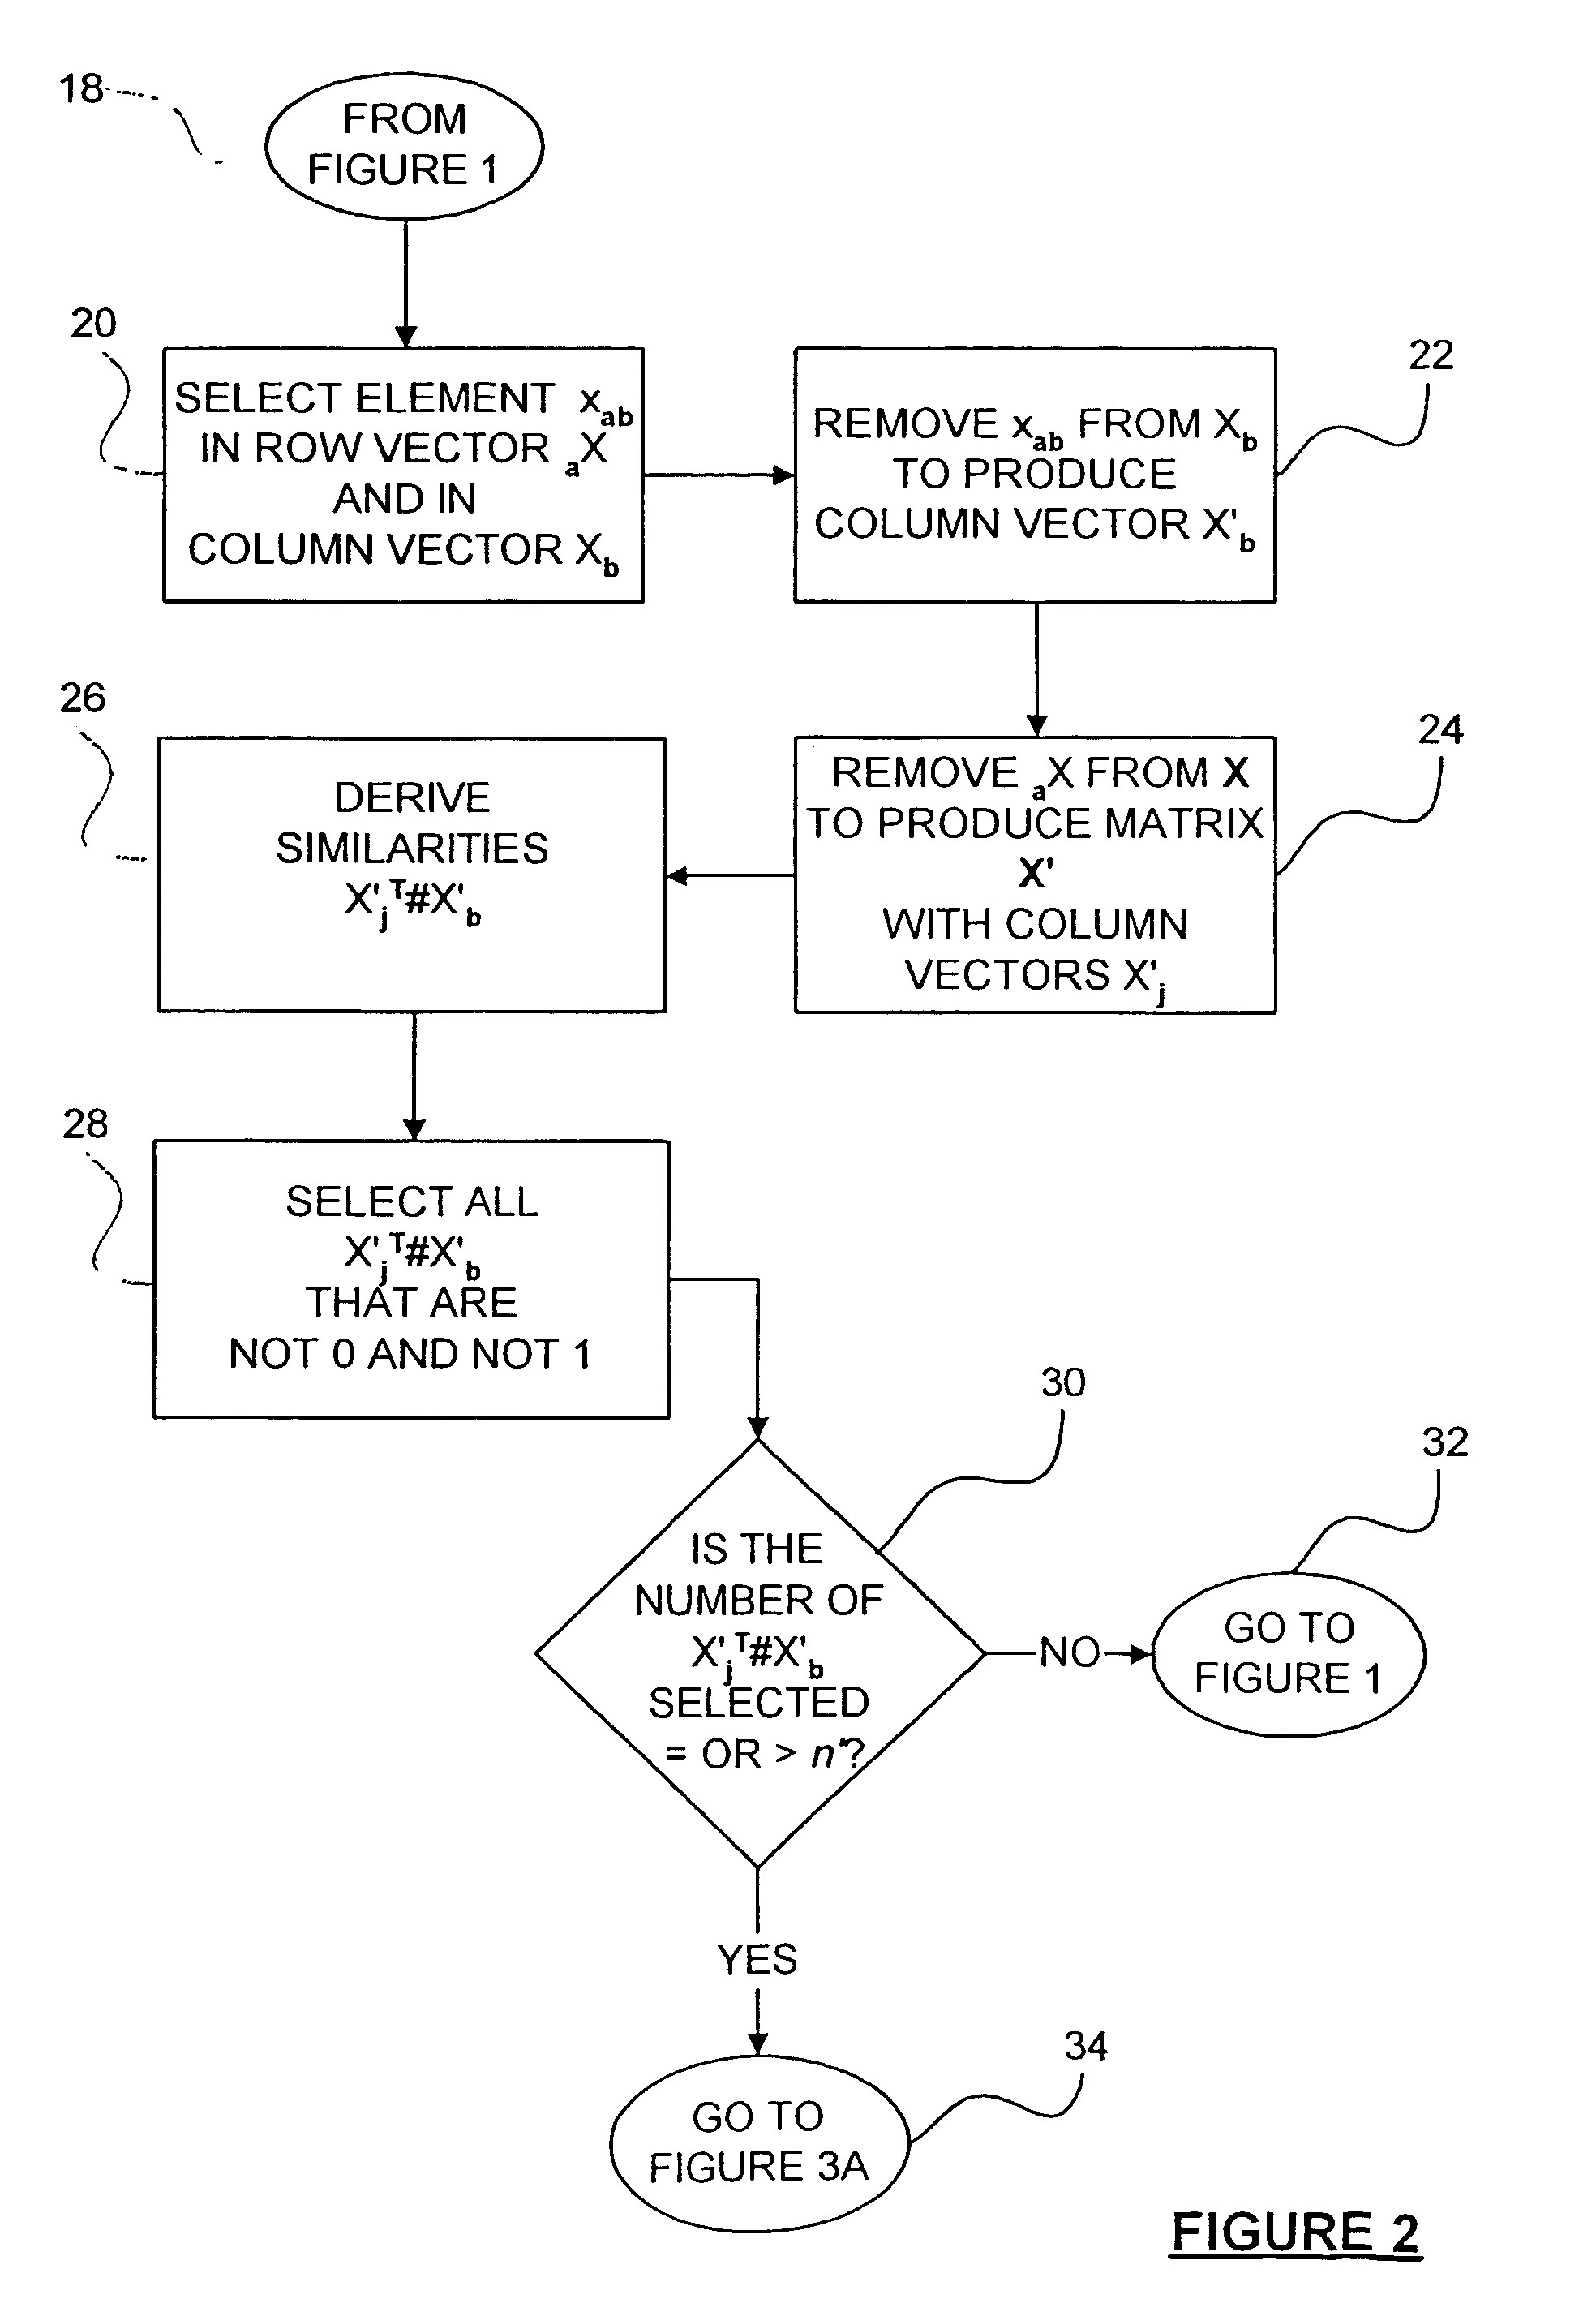 Method for estimating and reducing uncertainties in process measurements